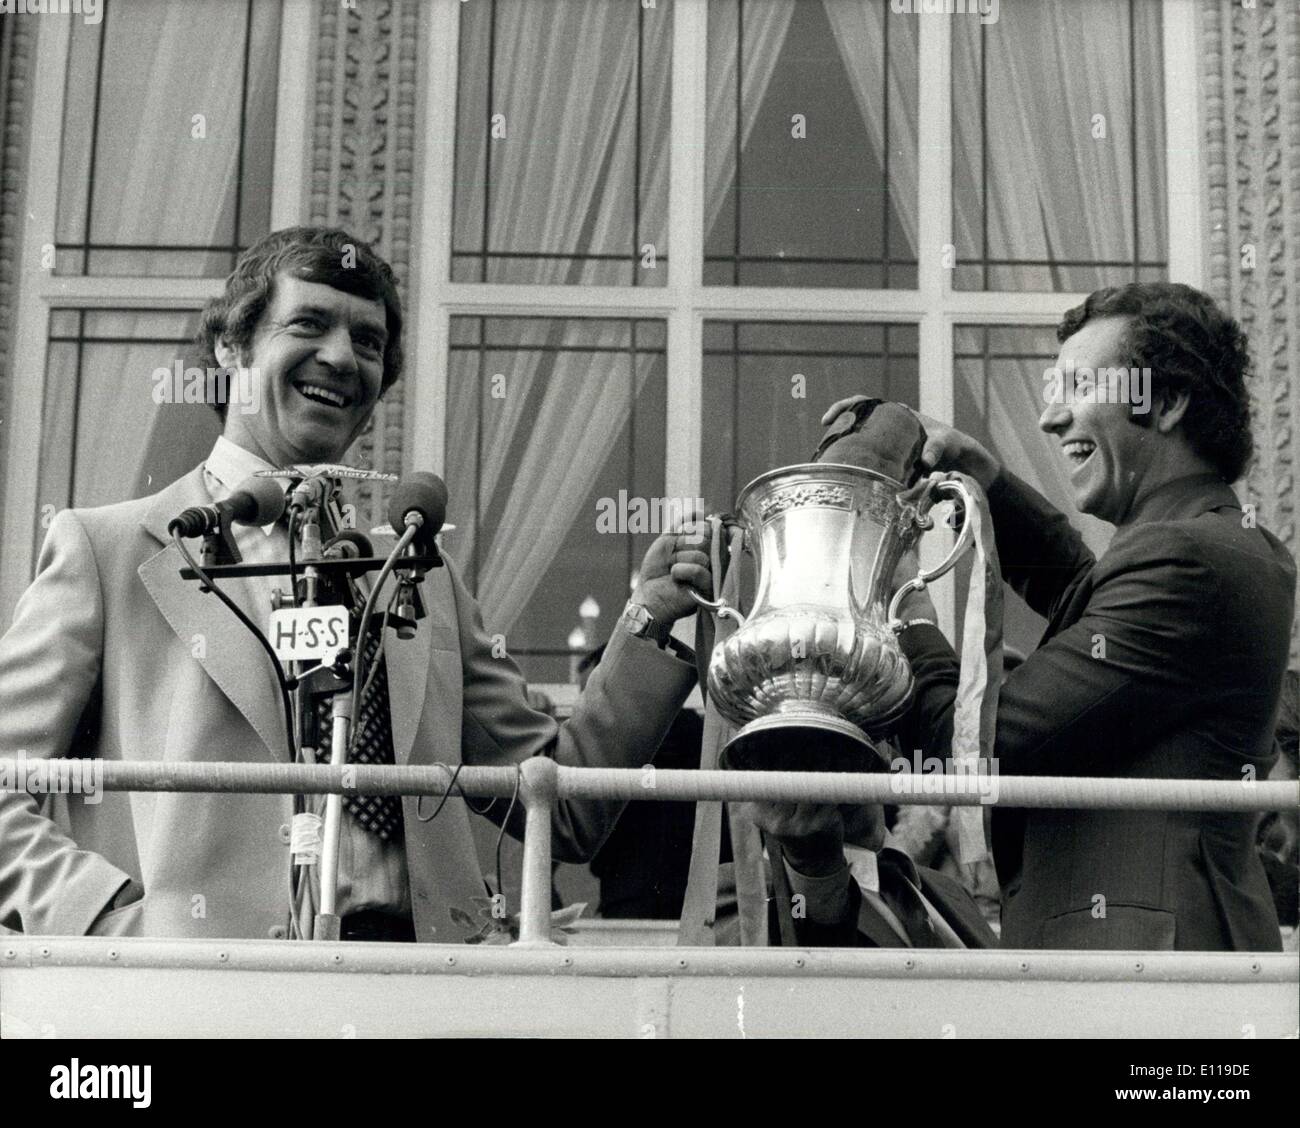 May 03, 1976 - F.A. CUP WINNERS RETURN TO SOUTHAMPTON: F.A. Cup winners, Southampton returned home yesterday to a welcome from ore than 160,000 people. The team were driven around the town in a open top double-Decker bus and at the end of the 19 mile route the Mayor MRS. ELEANOR PUGH gave the team the freedom of the Southampton. Photo shows Manager LAWRIE McMENEMY and player Peter Osgood celebrate the victory with champagne on the balcony of the Guildhall. Stock Photo